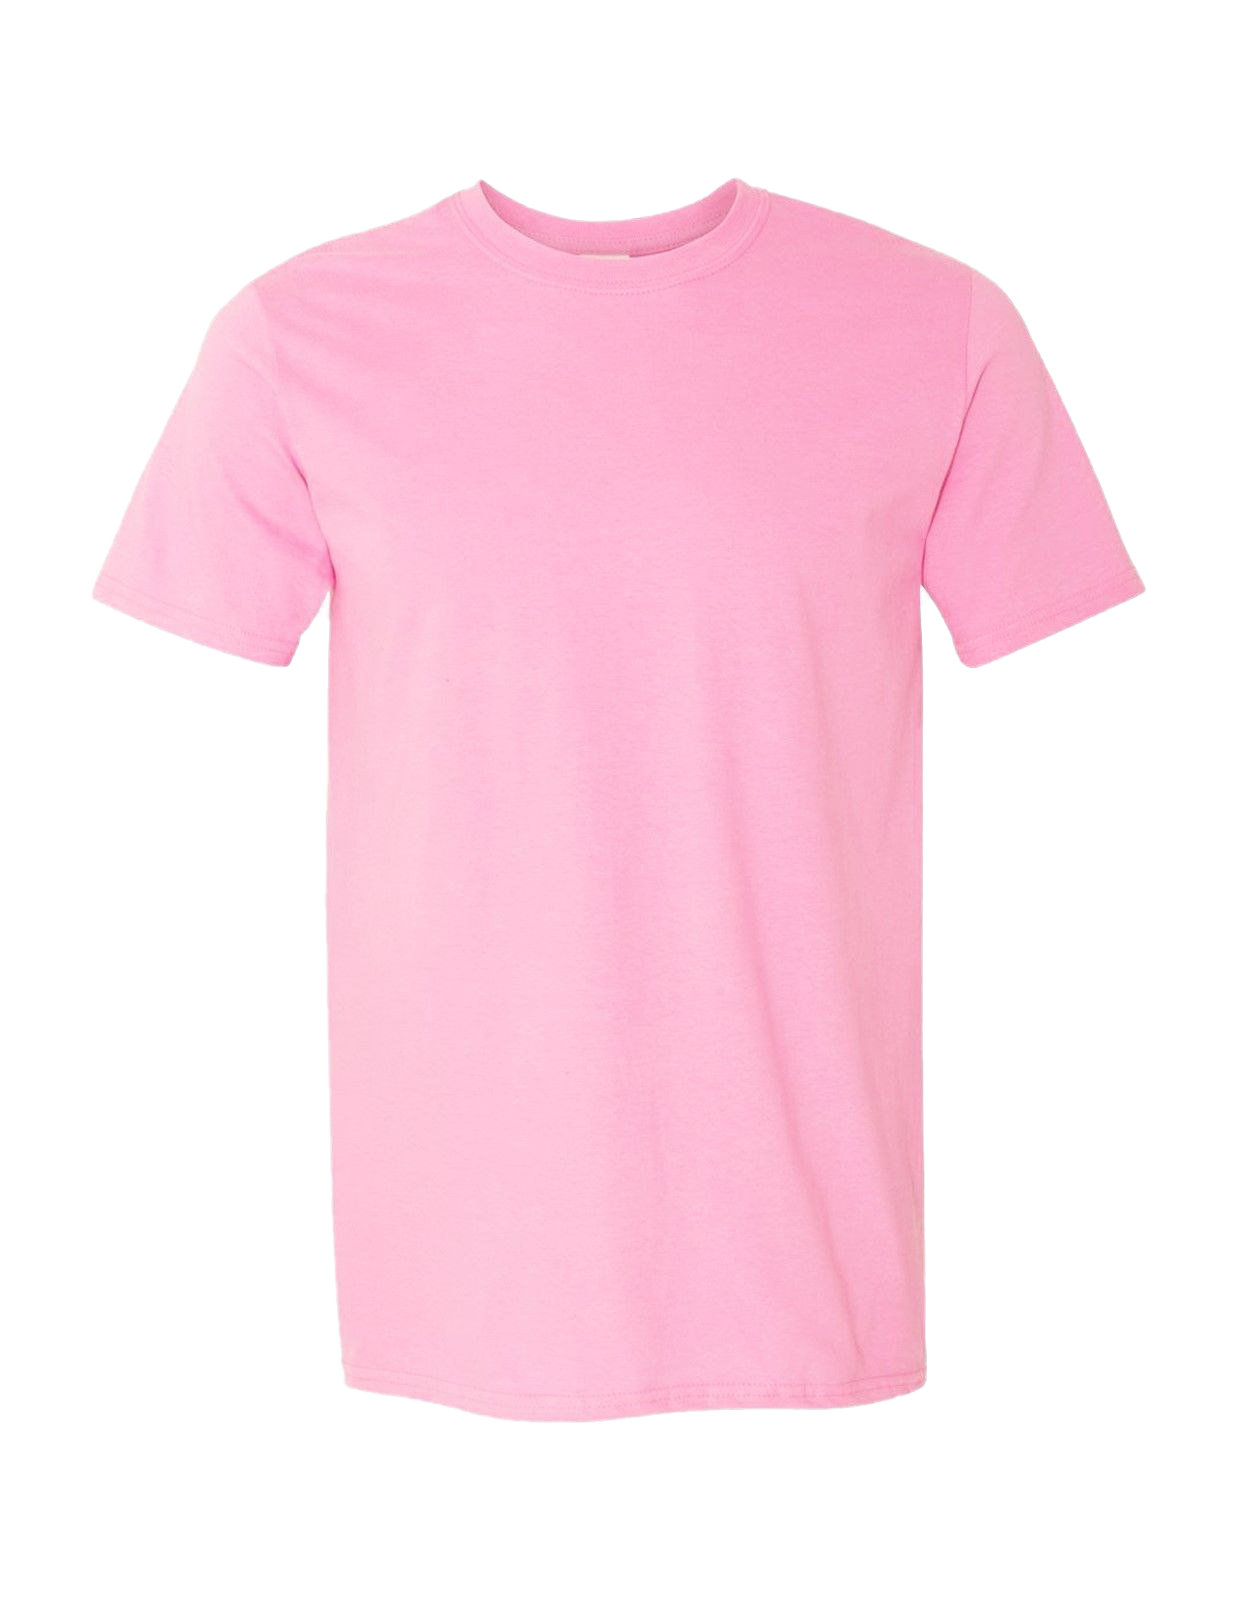 Pink TShirt PNG Transparent Images, Pictures, Photos PNG Arts